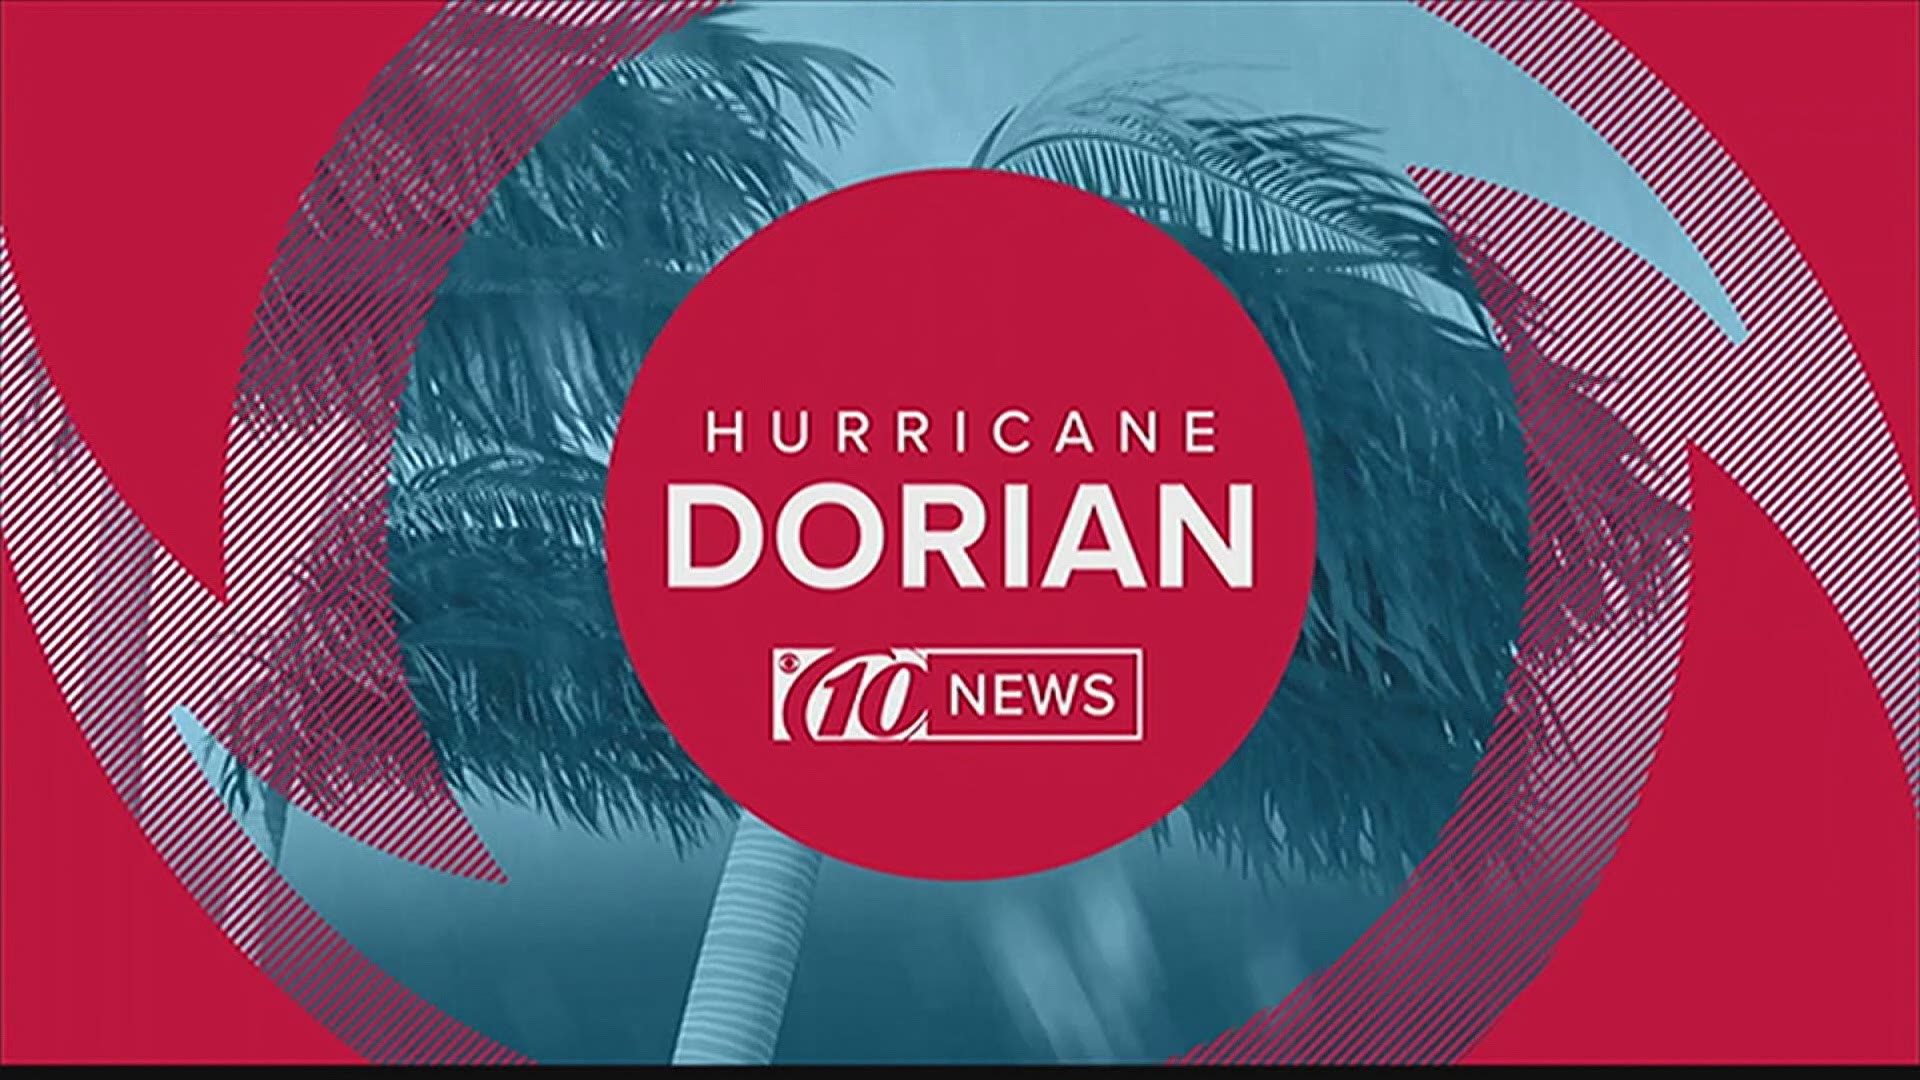 Aircraft with the National Oceanic and Atmospheric Administration and the Air Force have reaffirmed that Dorian is a Category 4 storm.

The National Hurricane Center has issued a tropical storm watch for parts of Florida's east coast ahead of Hurricane Dorian.